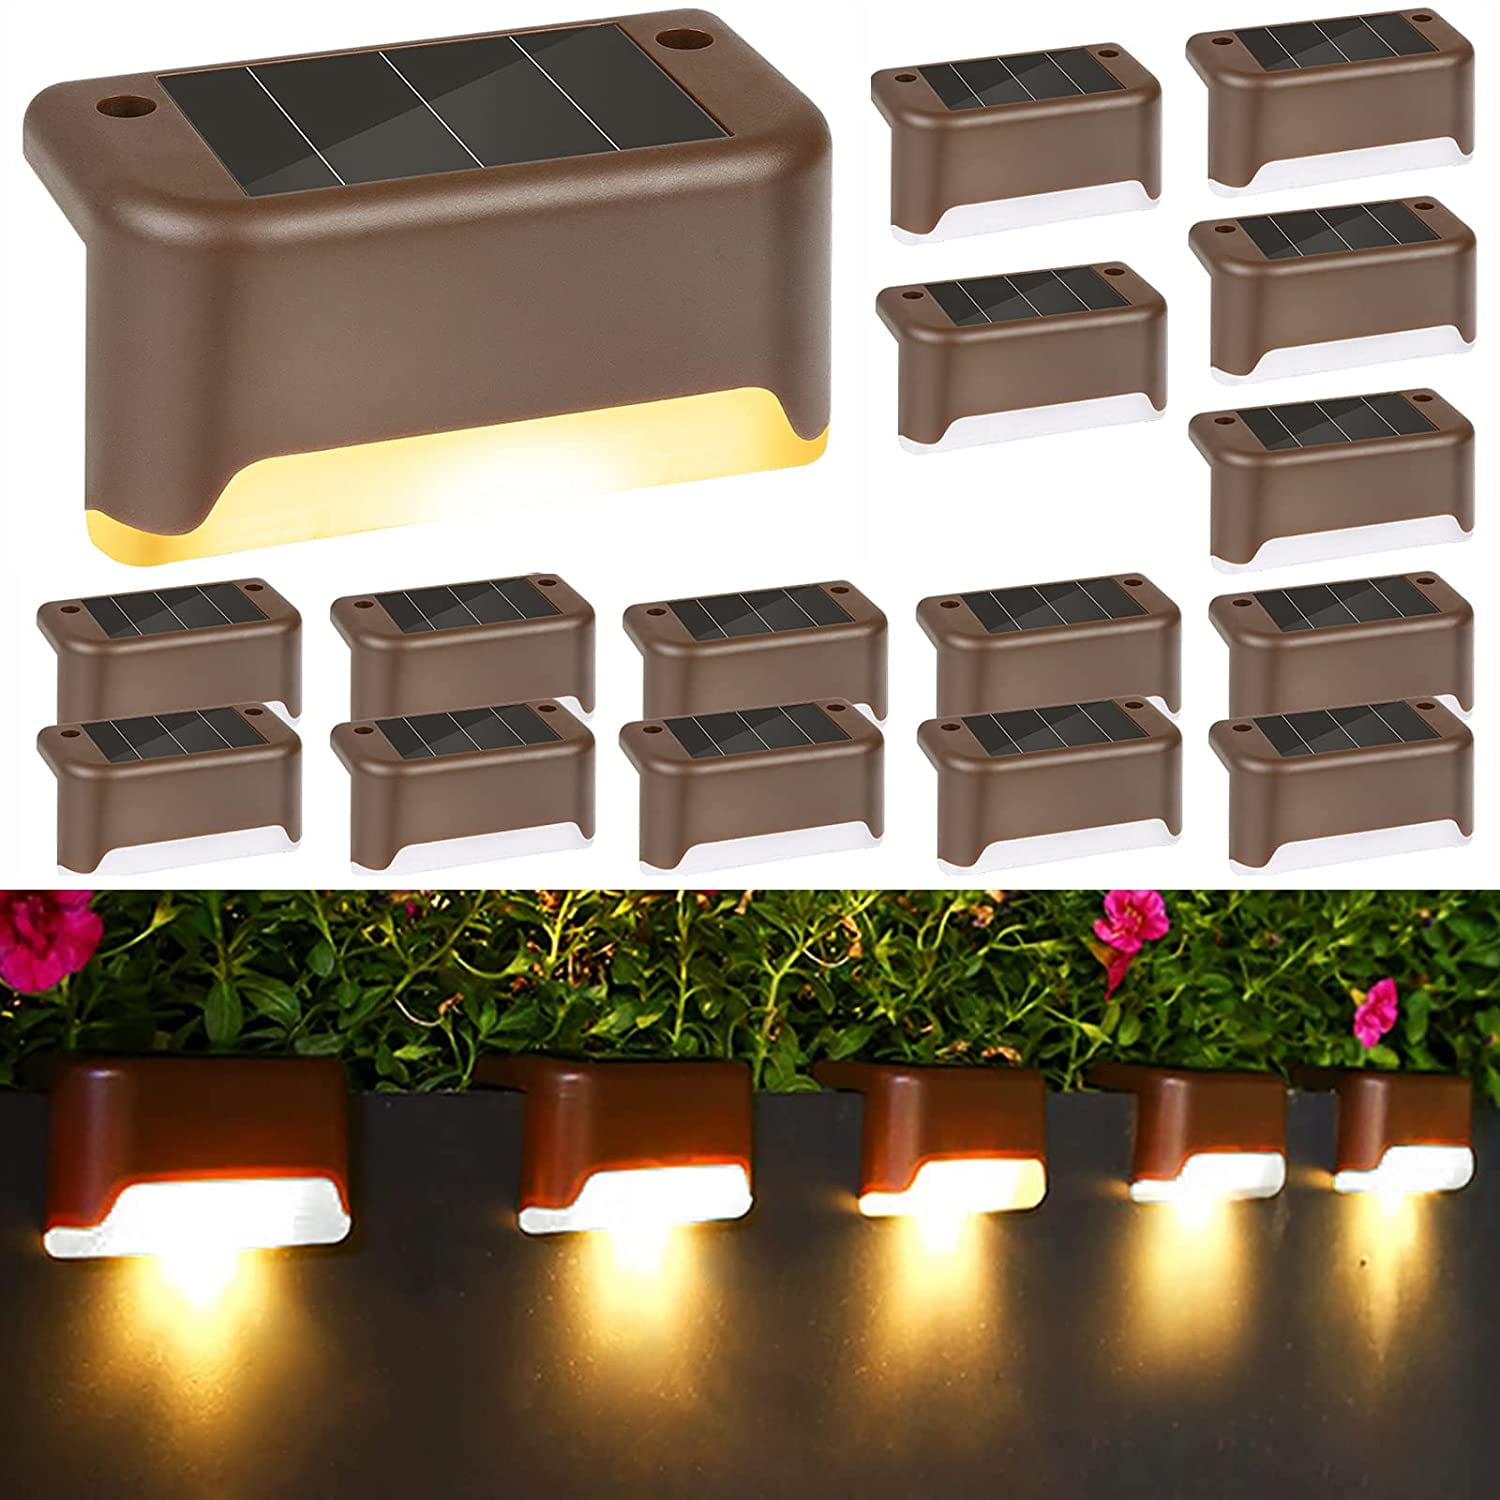 Morttic Solar Deck Lights Outdoor, 16 Pack Solar Step Lights LED Waterproof  Solar Fence Lights Stair Lights for Railing, Deck, Patio, Yard, Post and  Driveway, Warm White